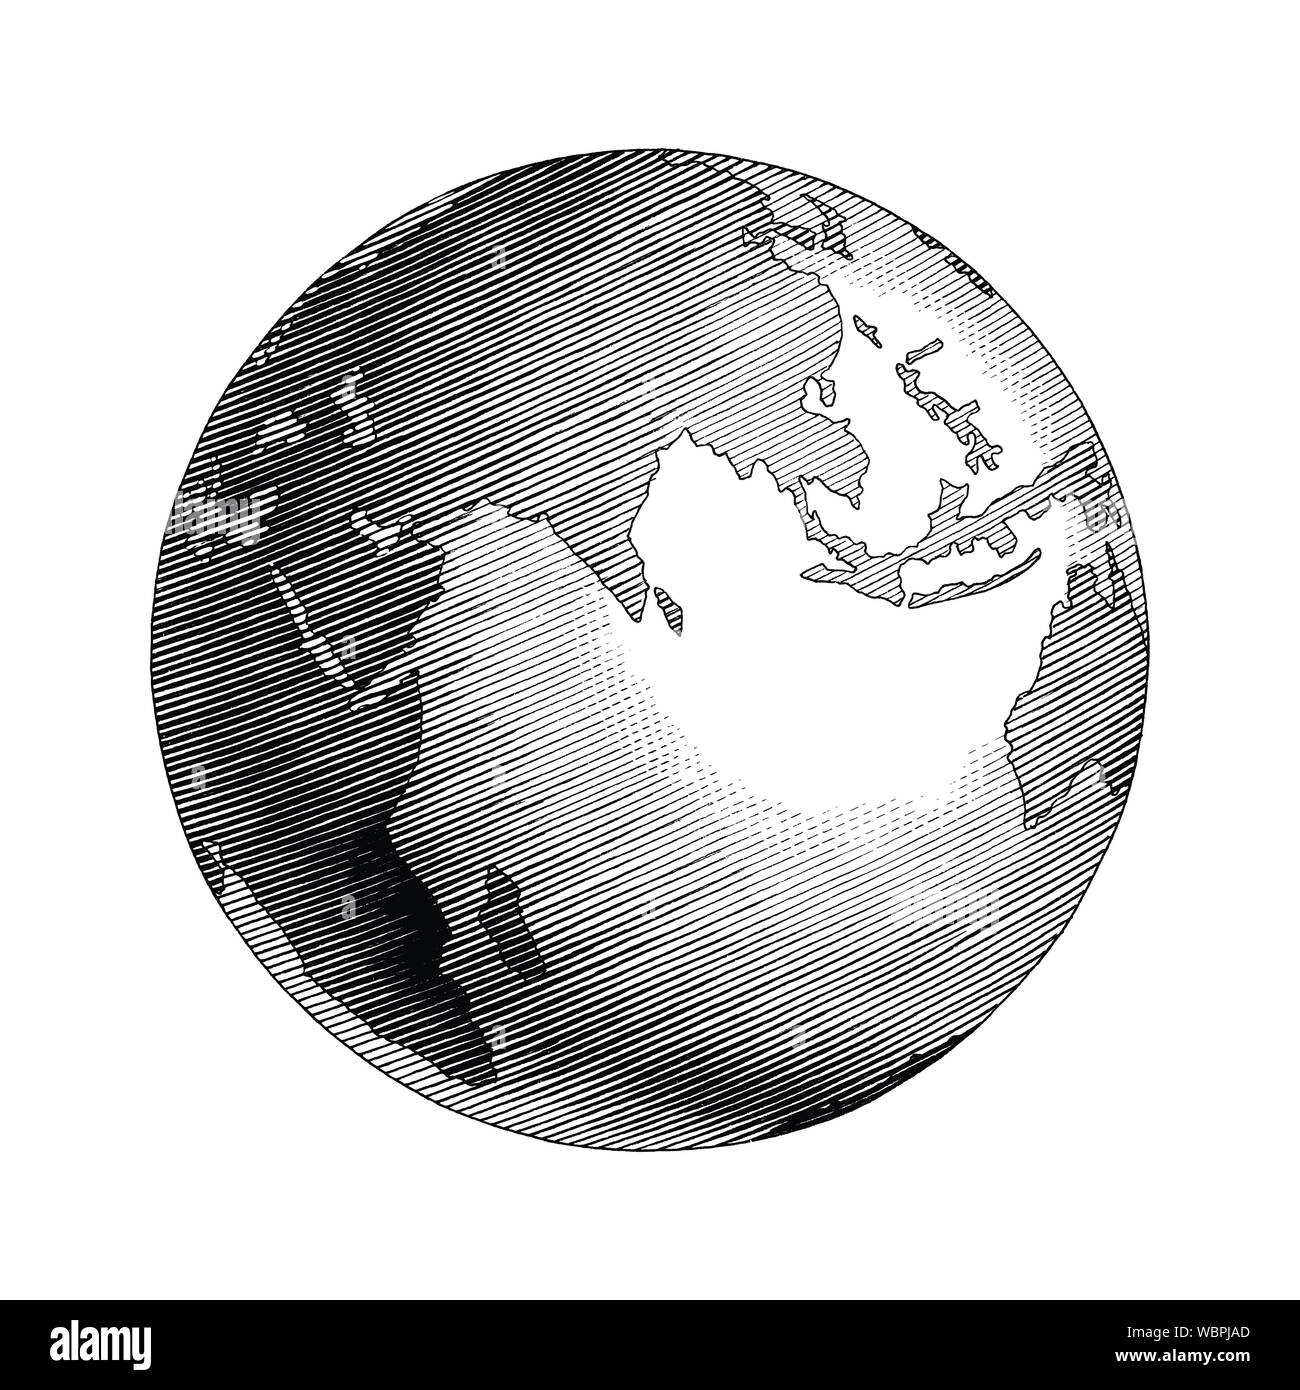 Antique globe hand drawing vintage style black and white clip art isolated on white background Stock Vector